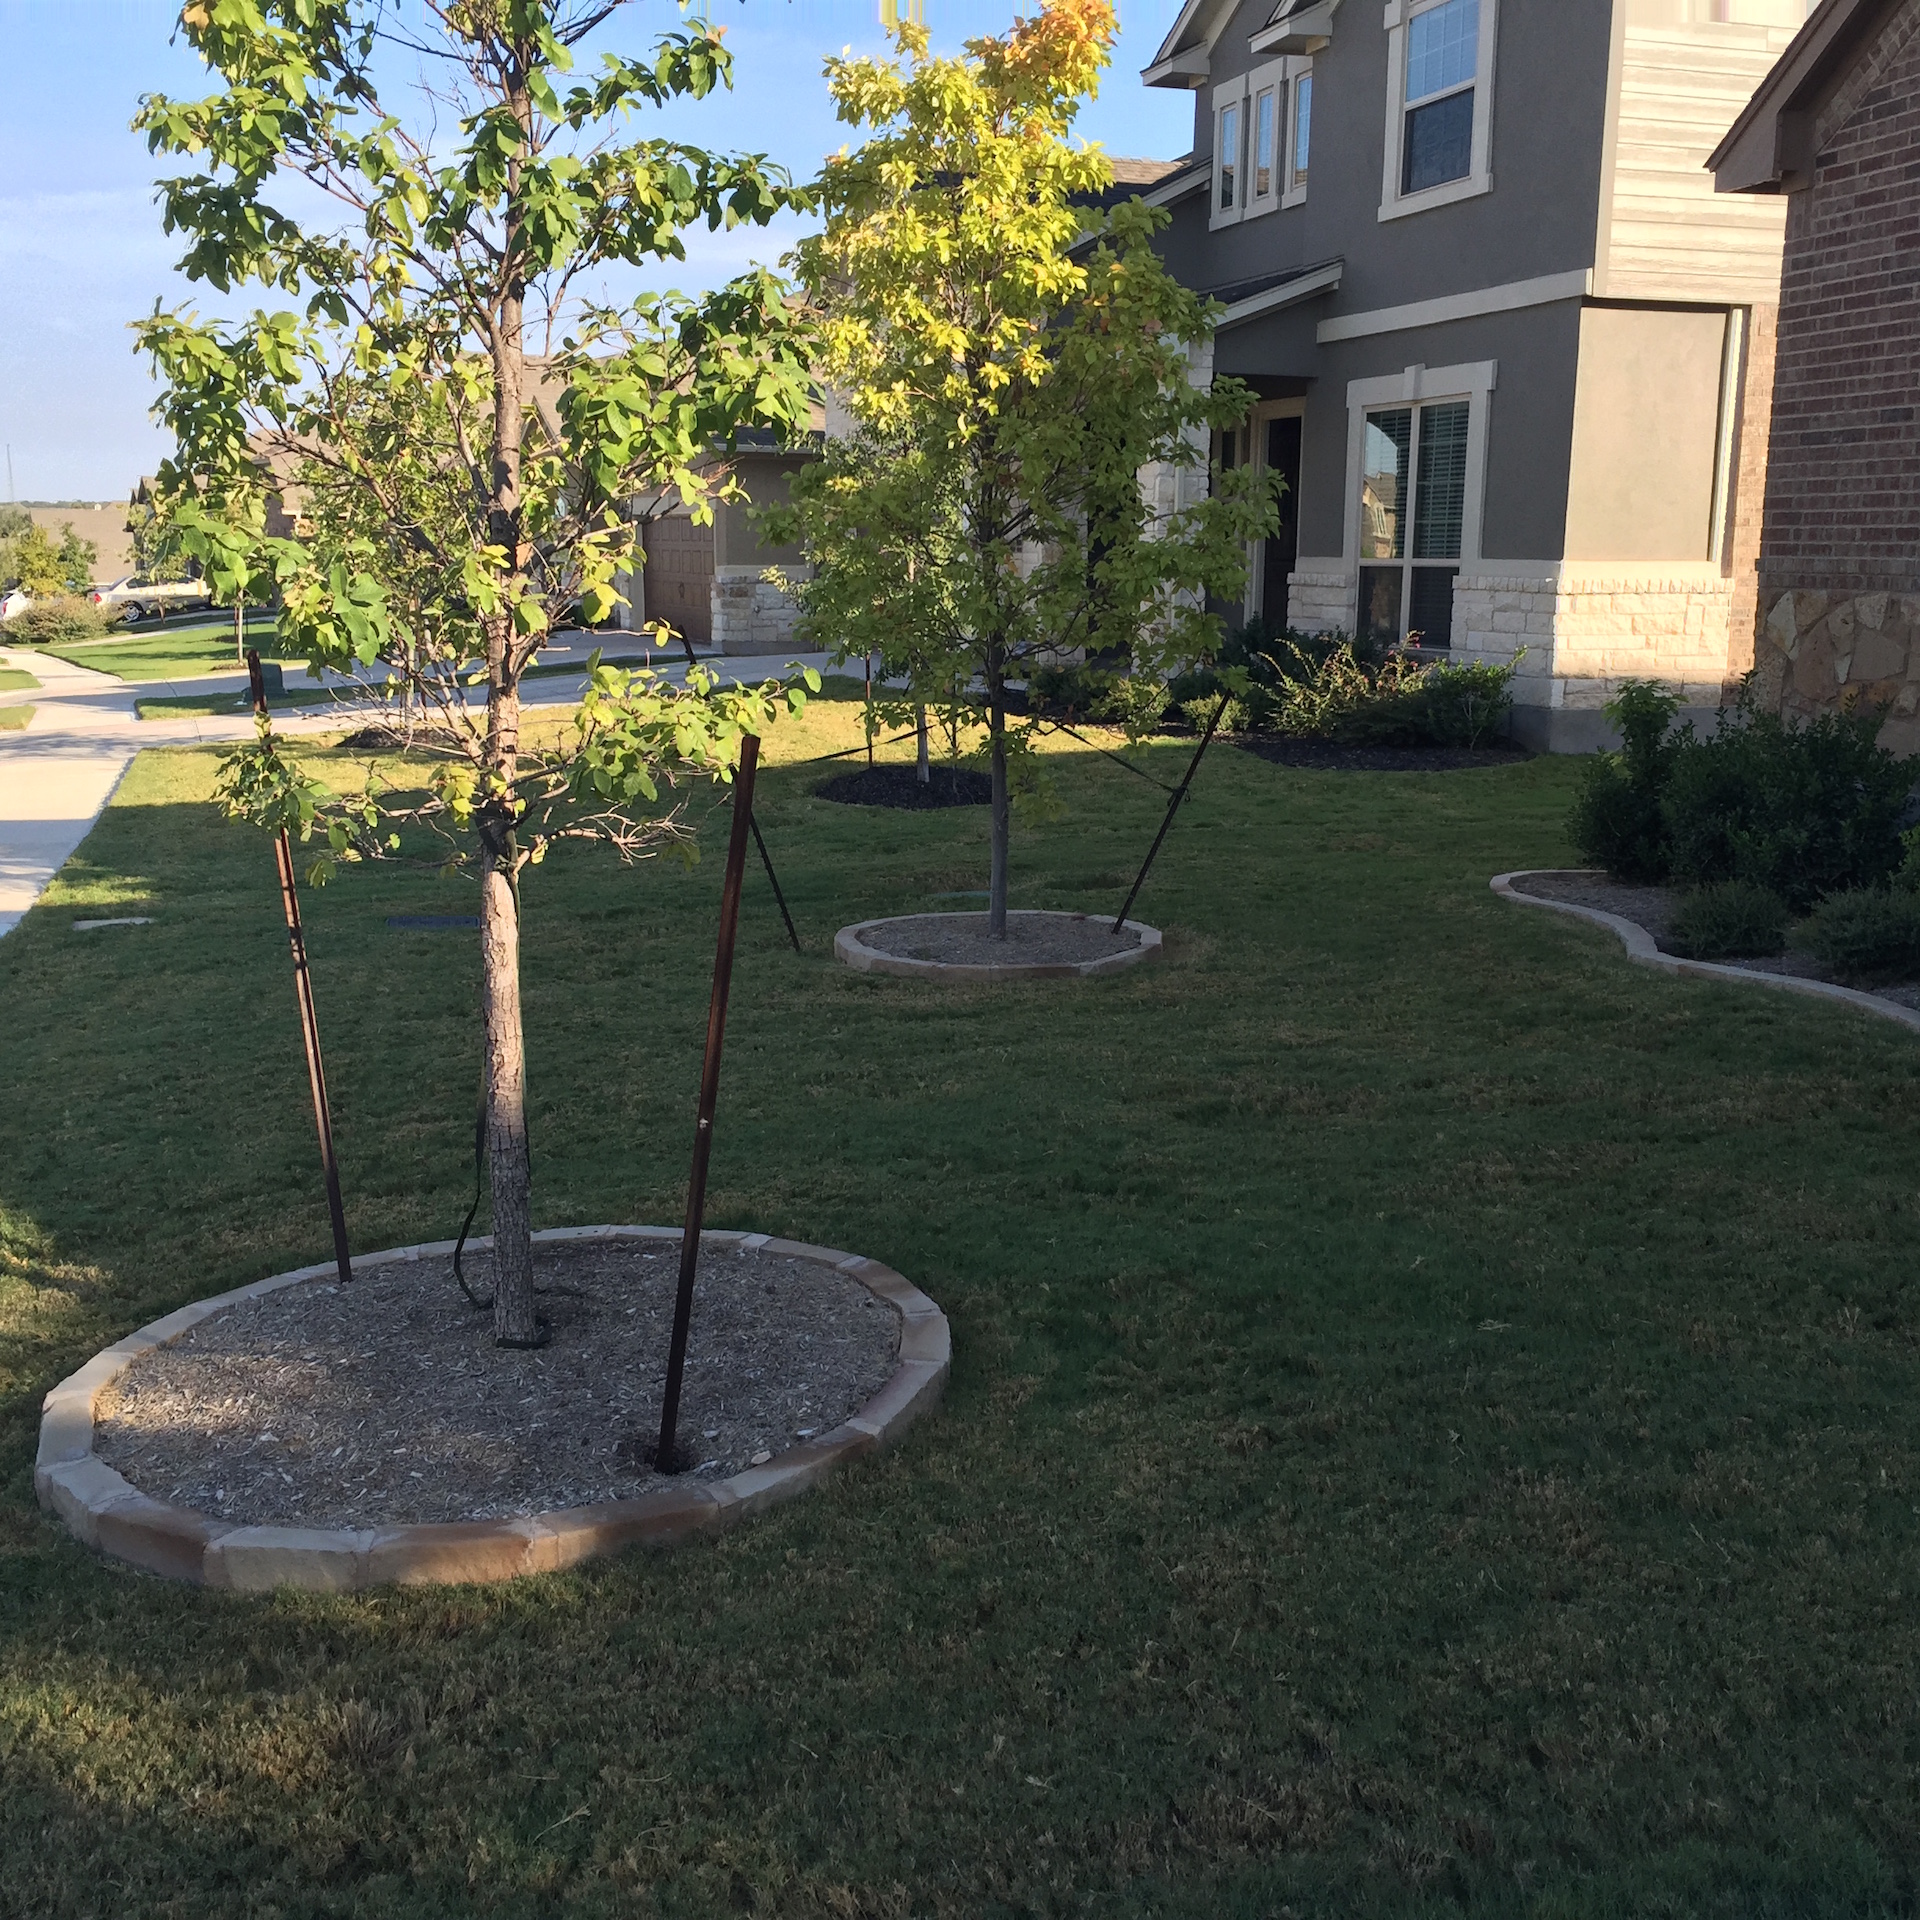 https://www.grassworksaustin.com/wp-content/uploads/2022/07/Grass-Works-Lawn-Care-Austin-Tree-and-Plant-Install.jpg